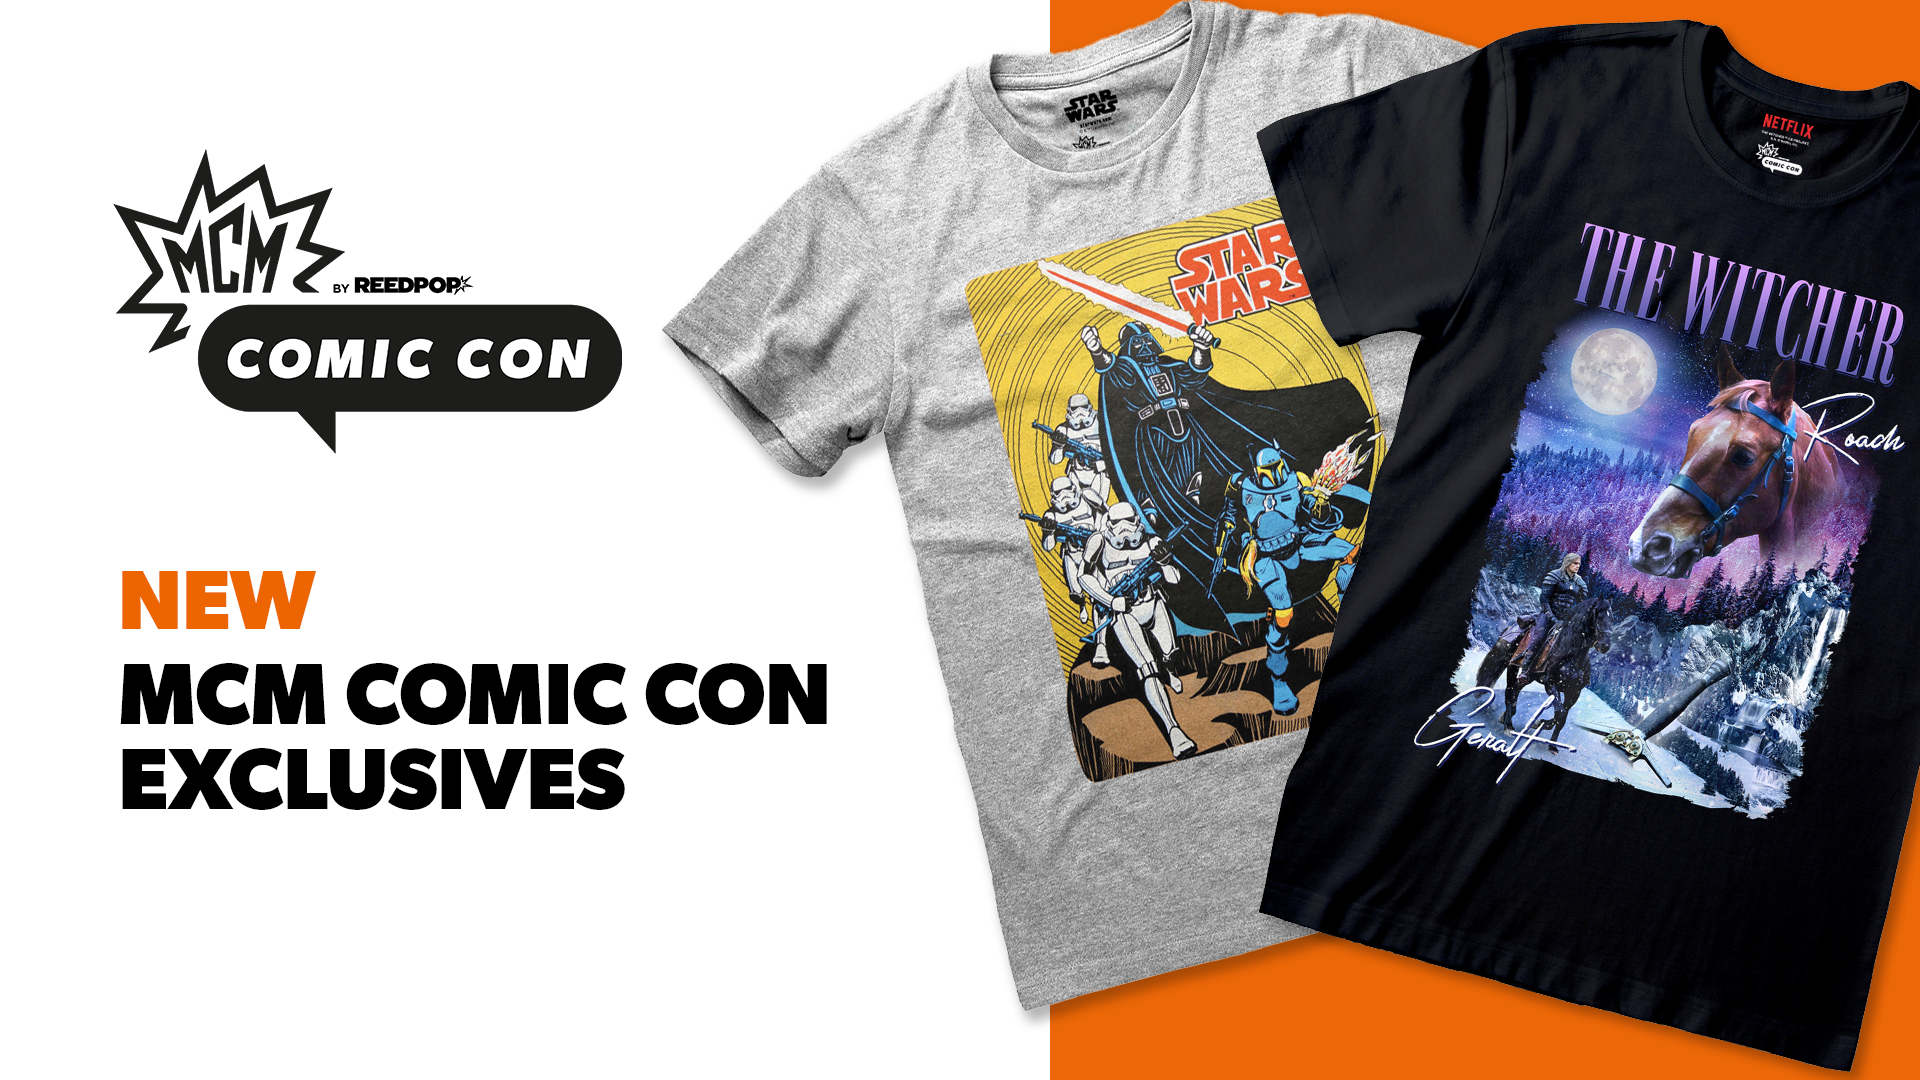 Image for New Exclusive MCM Comic Con Merch (Loki, The Witcher, Star Wars)